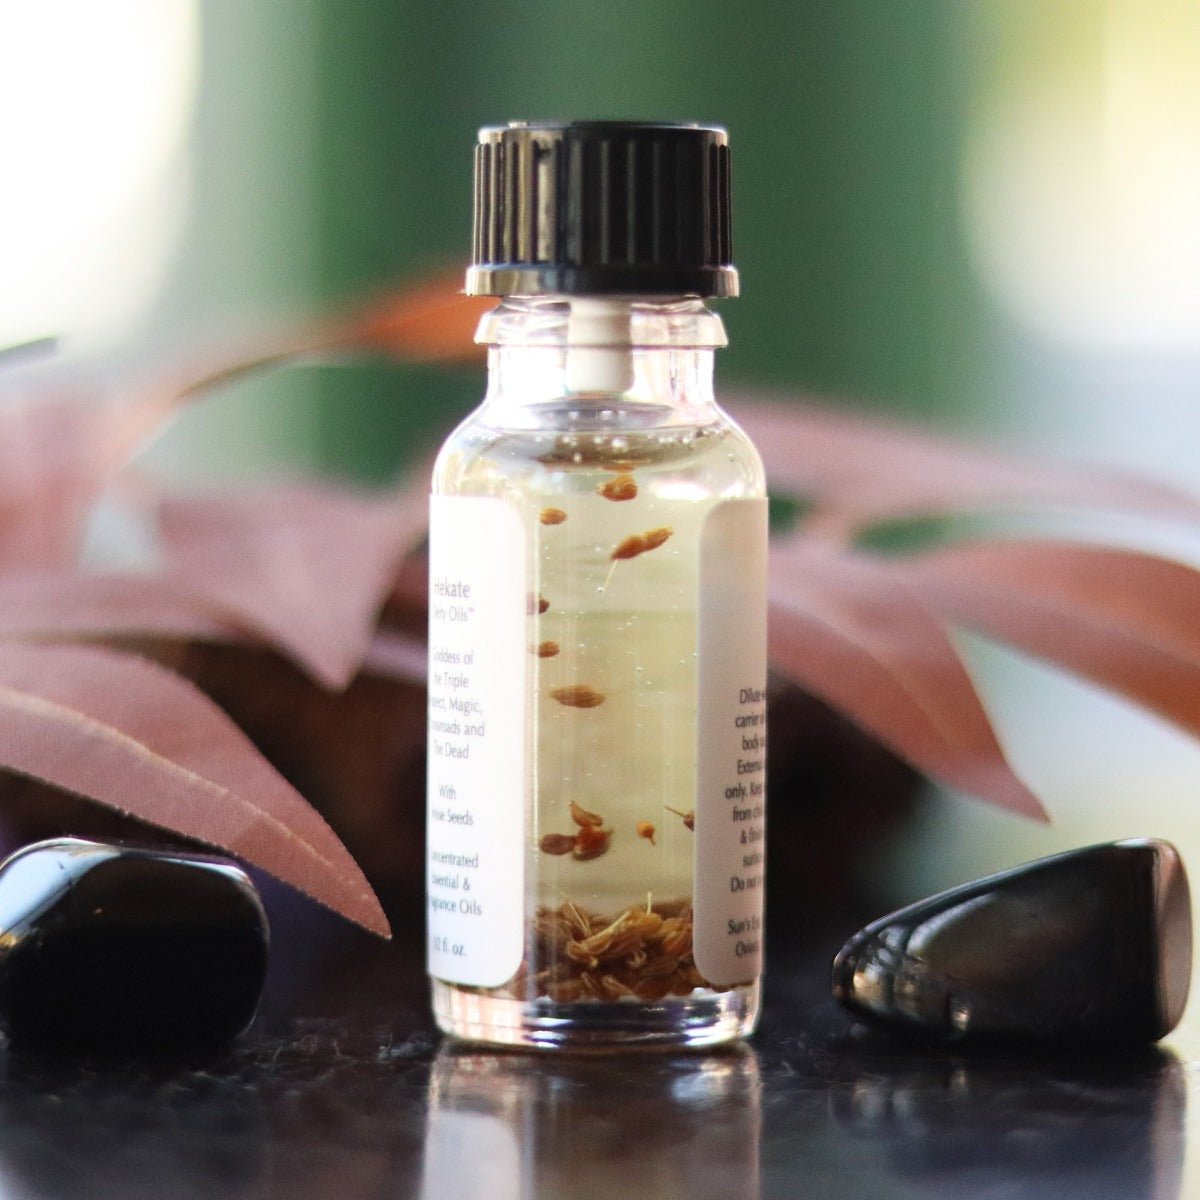 Hekate Oil by Suns Eye - 13 Moons